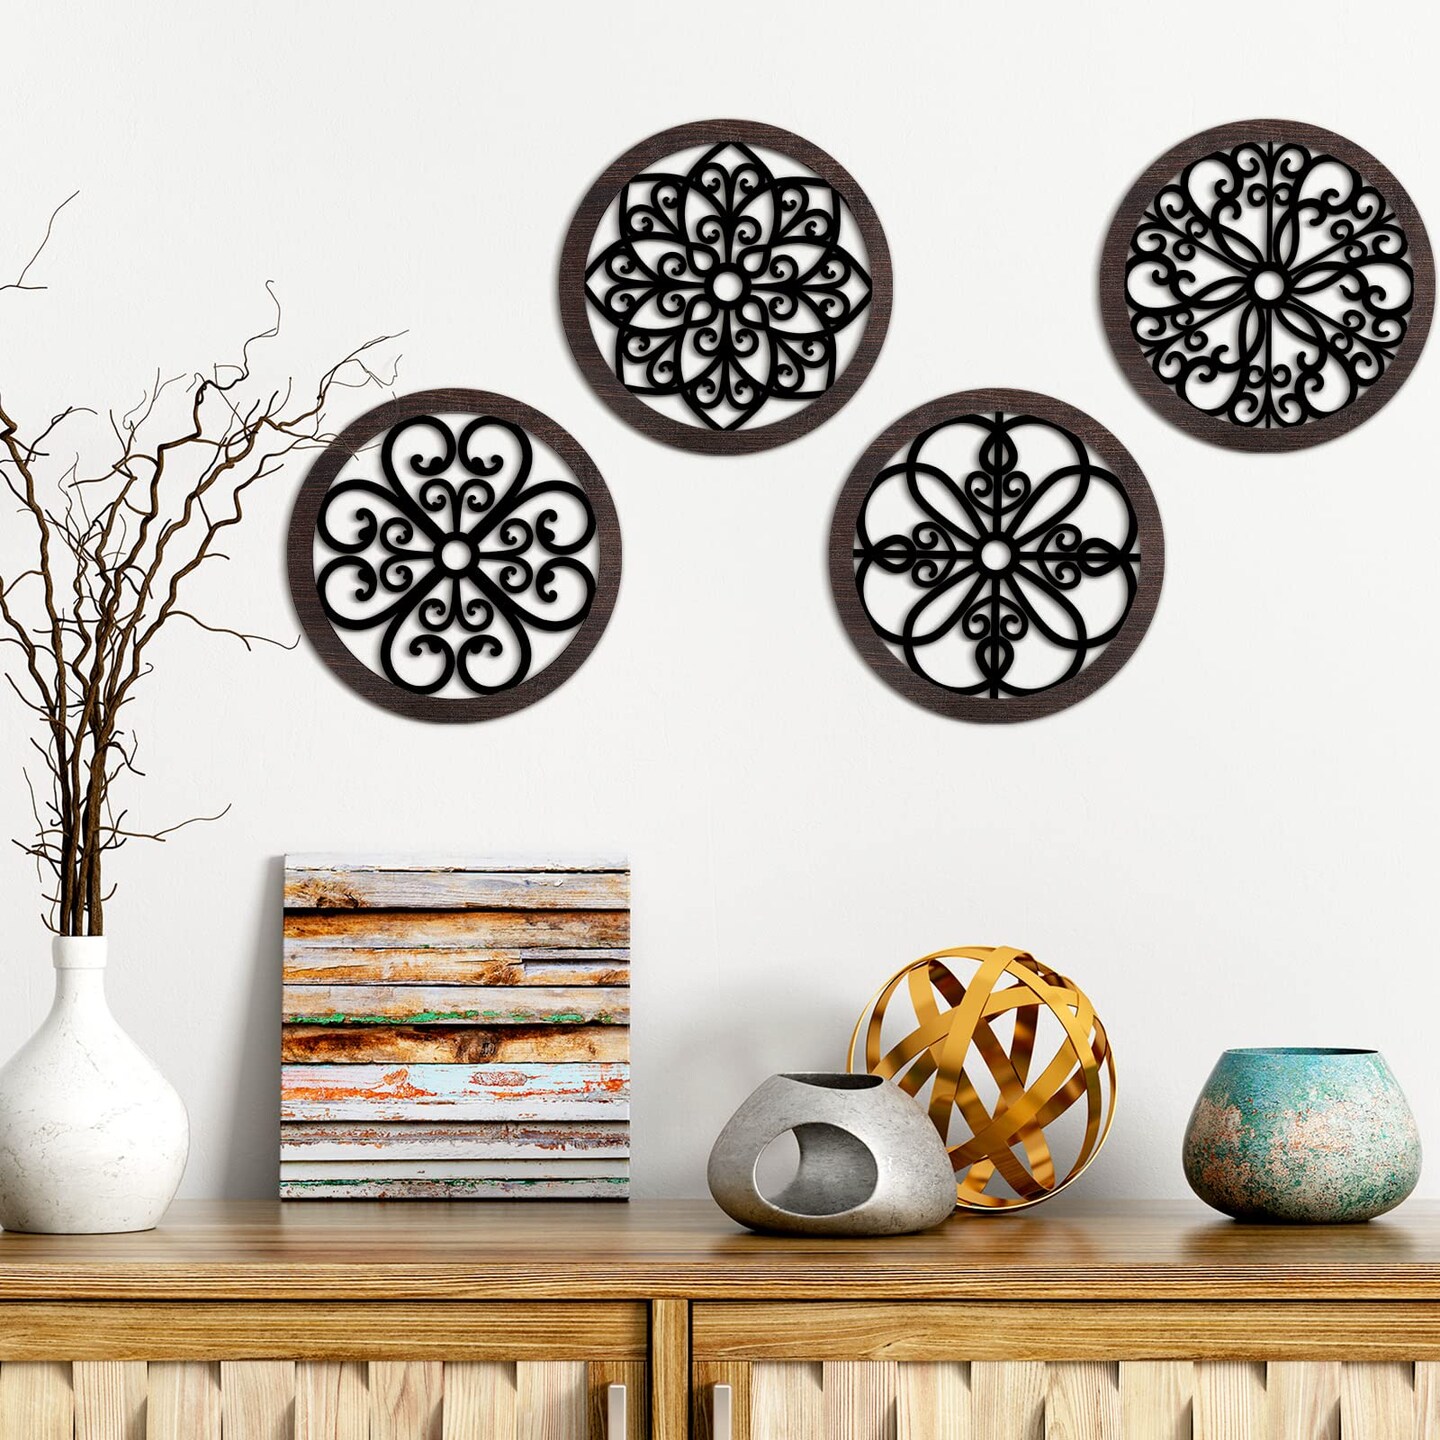 4 Pieces Thicken Rustic Wall Decor Farmhouse Wall Art Decor Wooden Hollow Carved Design Rustic Round Wall Art for Living Room Bedroom Hallway Decor Office Kitchen Wall (Black, Brown,10 x 10 Inch)